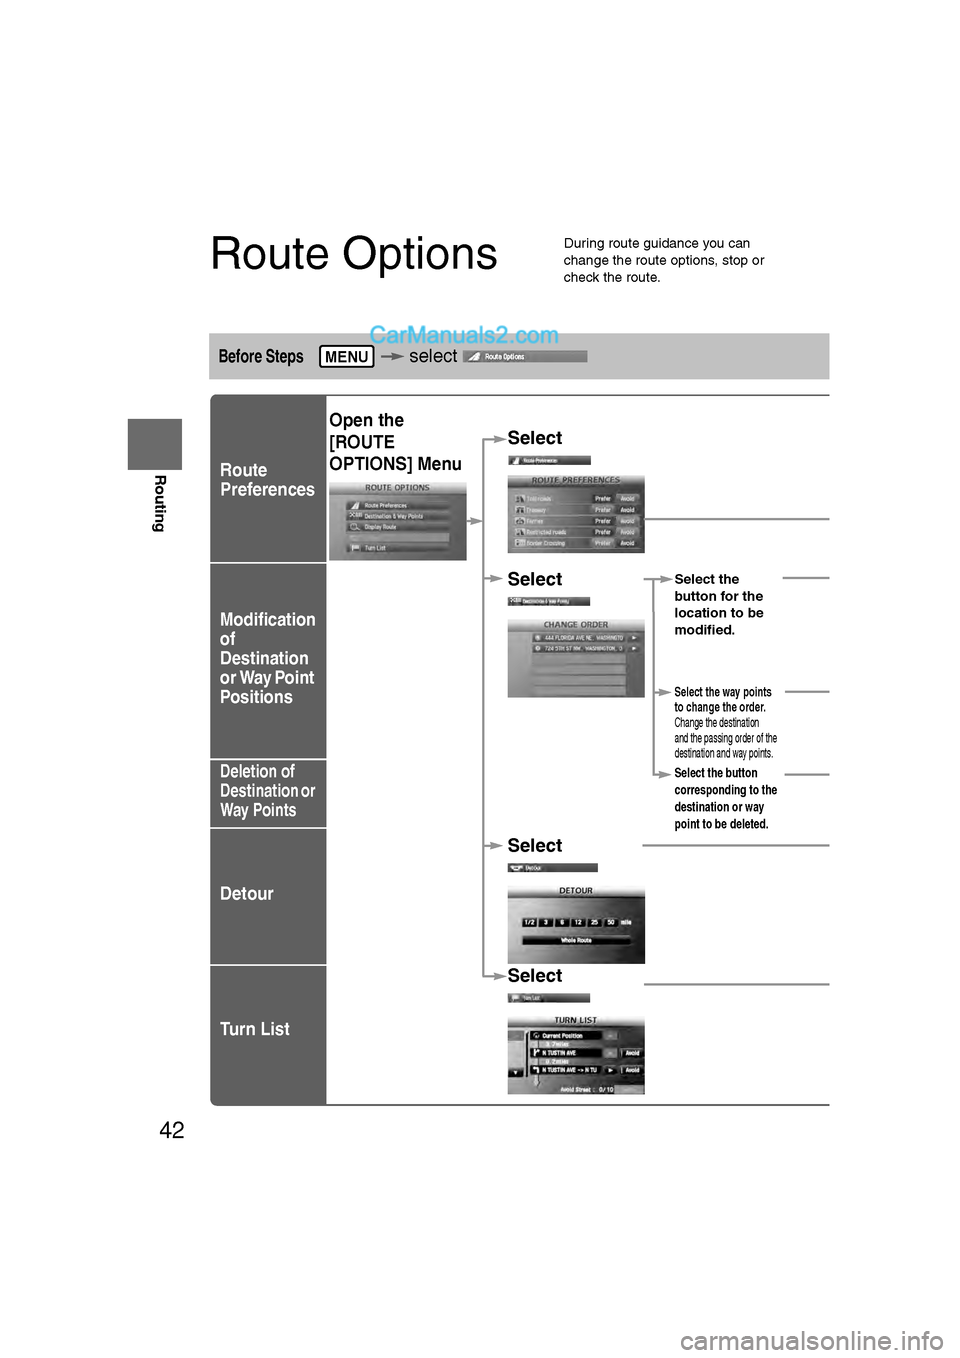 MAZDA MODEL CX-9 2011  Navigation Manual (in English) 42
Before 
UseGetting
started
Routing
Route Options
l
During route guidance you can 
change the route options, stop or 
check the route.
Before Steps  select   
Route
Preferences
Modification
of
Desti